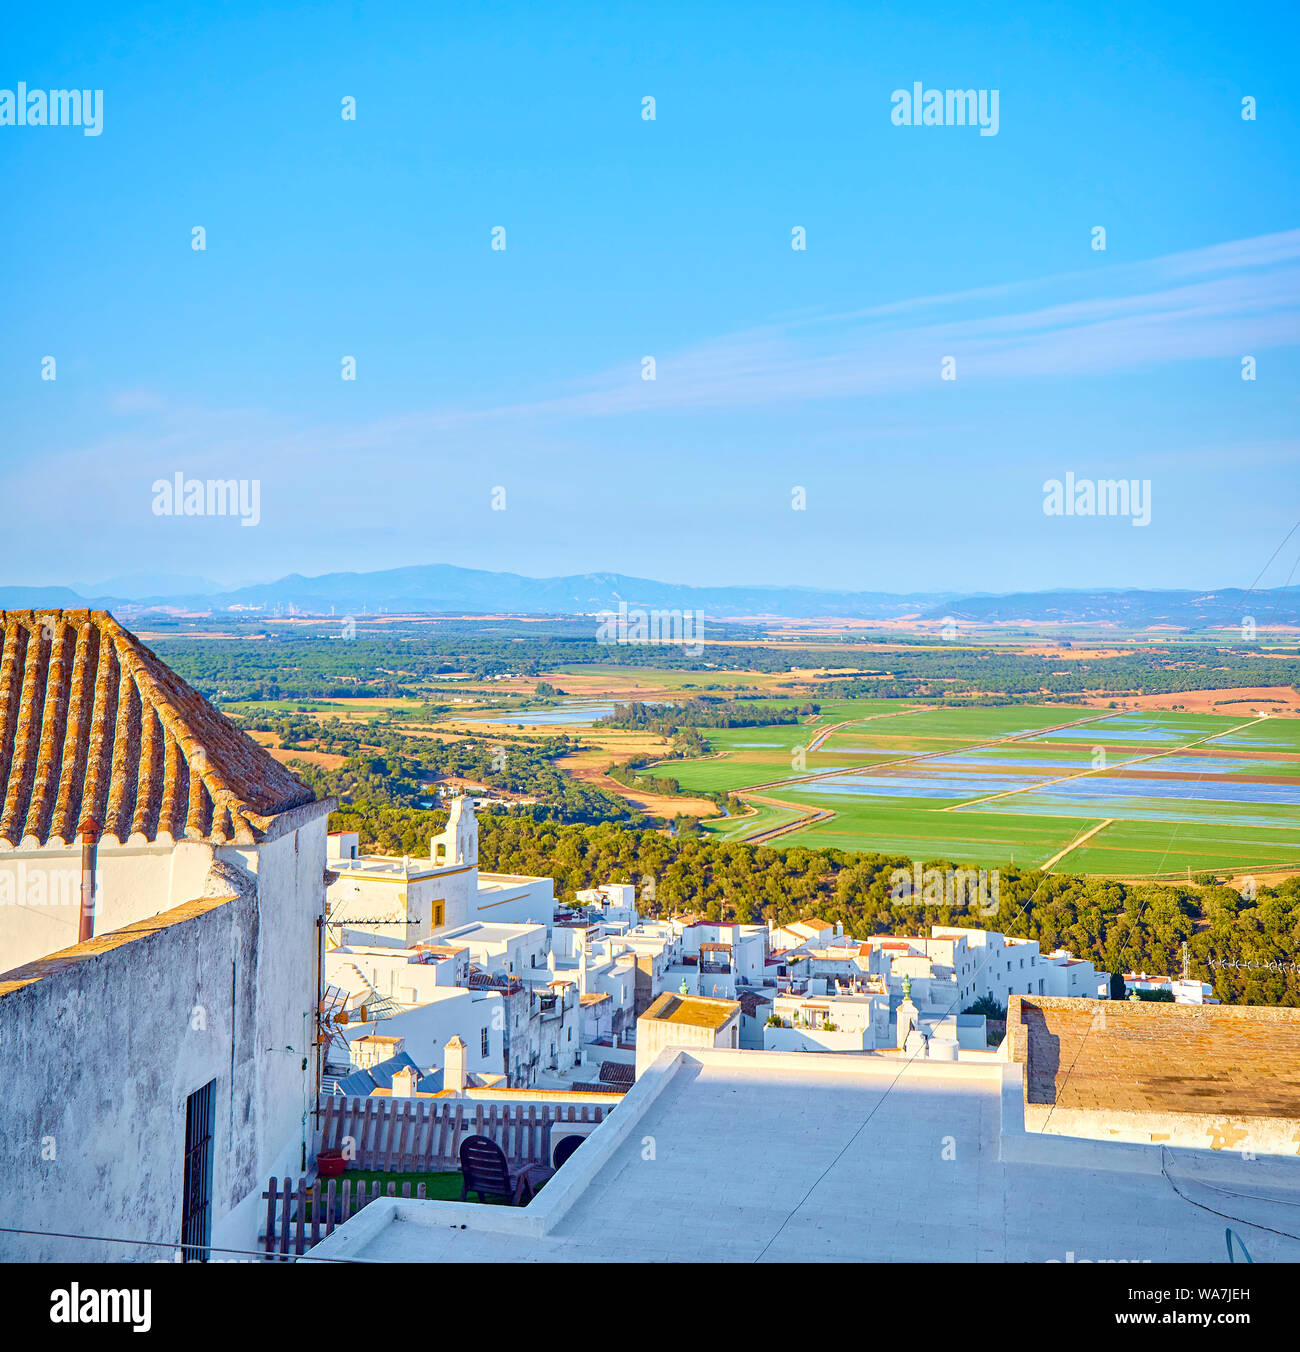 A view of the La Janda county with the Marshes of Barbate river. Vejer de la Frontera downtown. Cadiz province, Andalusia, Spain. Stock Photo